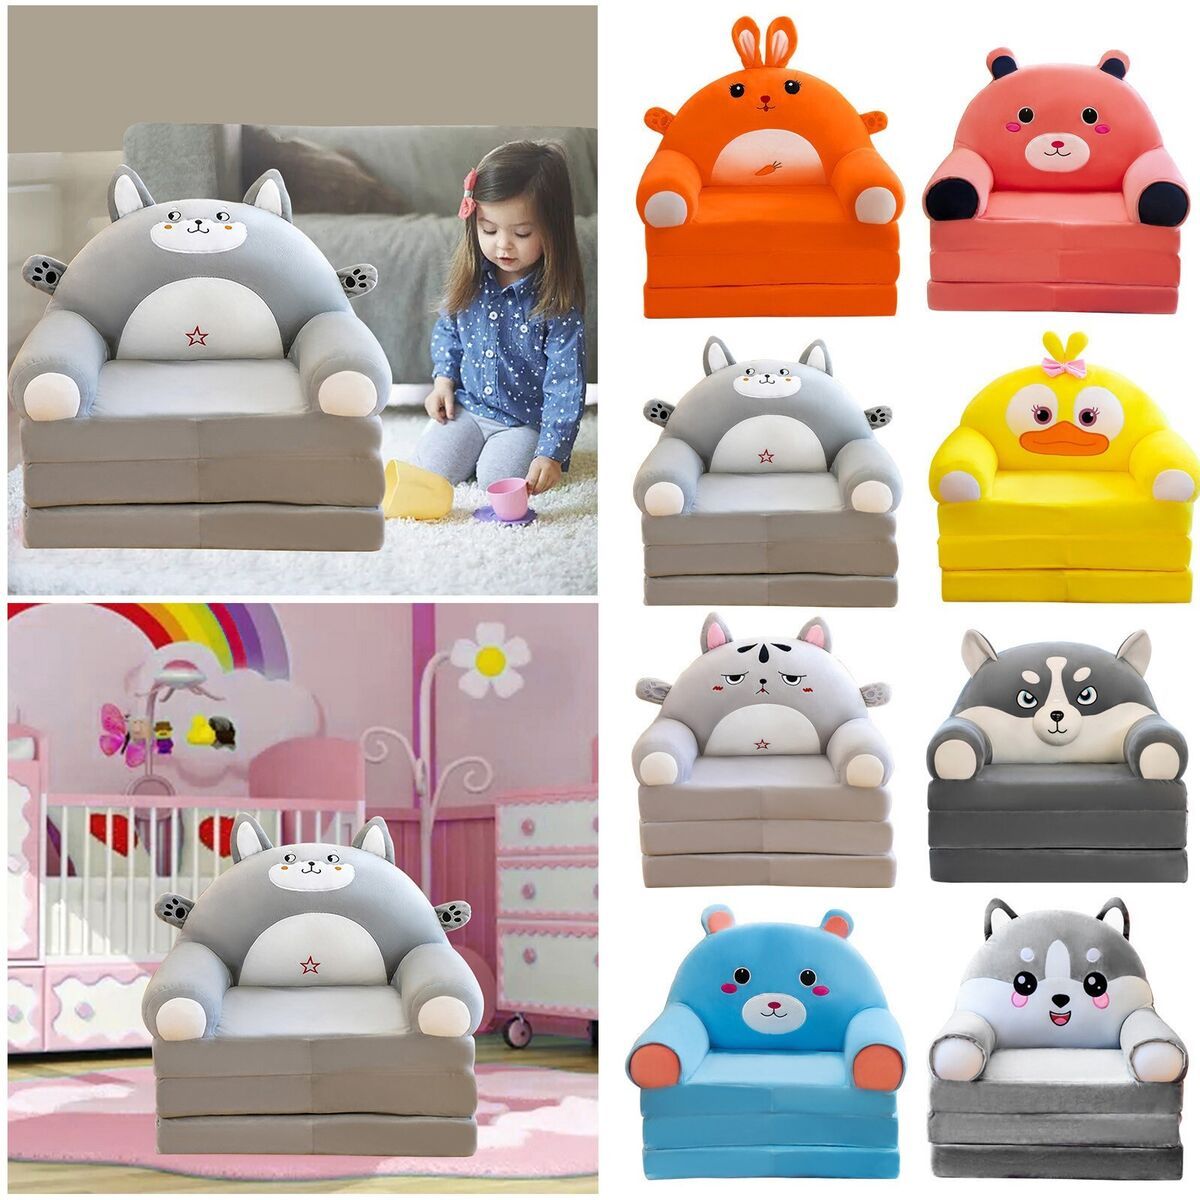 Plush Foldable Kids Sofa Backrest Armchair 2 In 1 Foldable Without Liner  Filler | Ebay Pertaining To 2 In 1 Foldable Sofas (View 12 of 15)